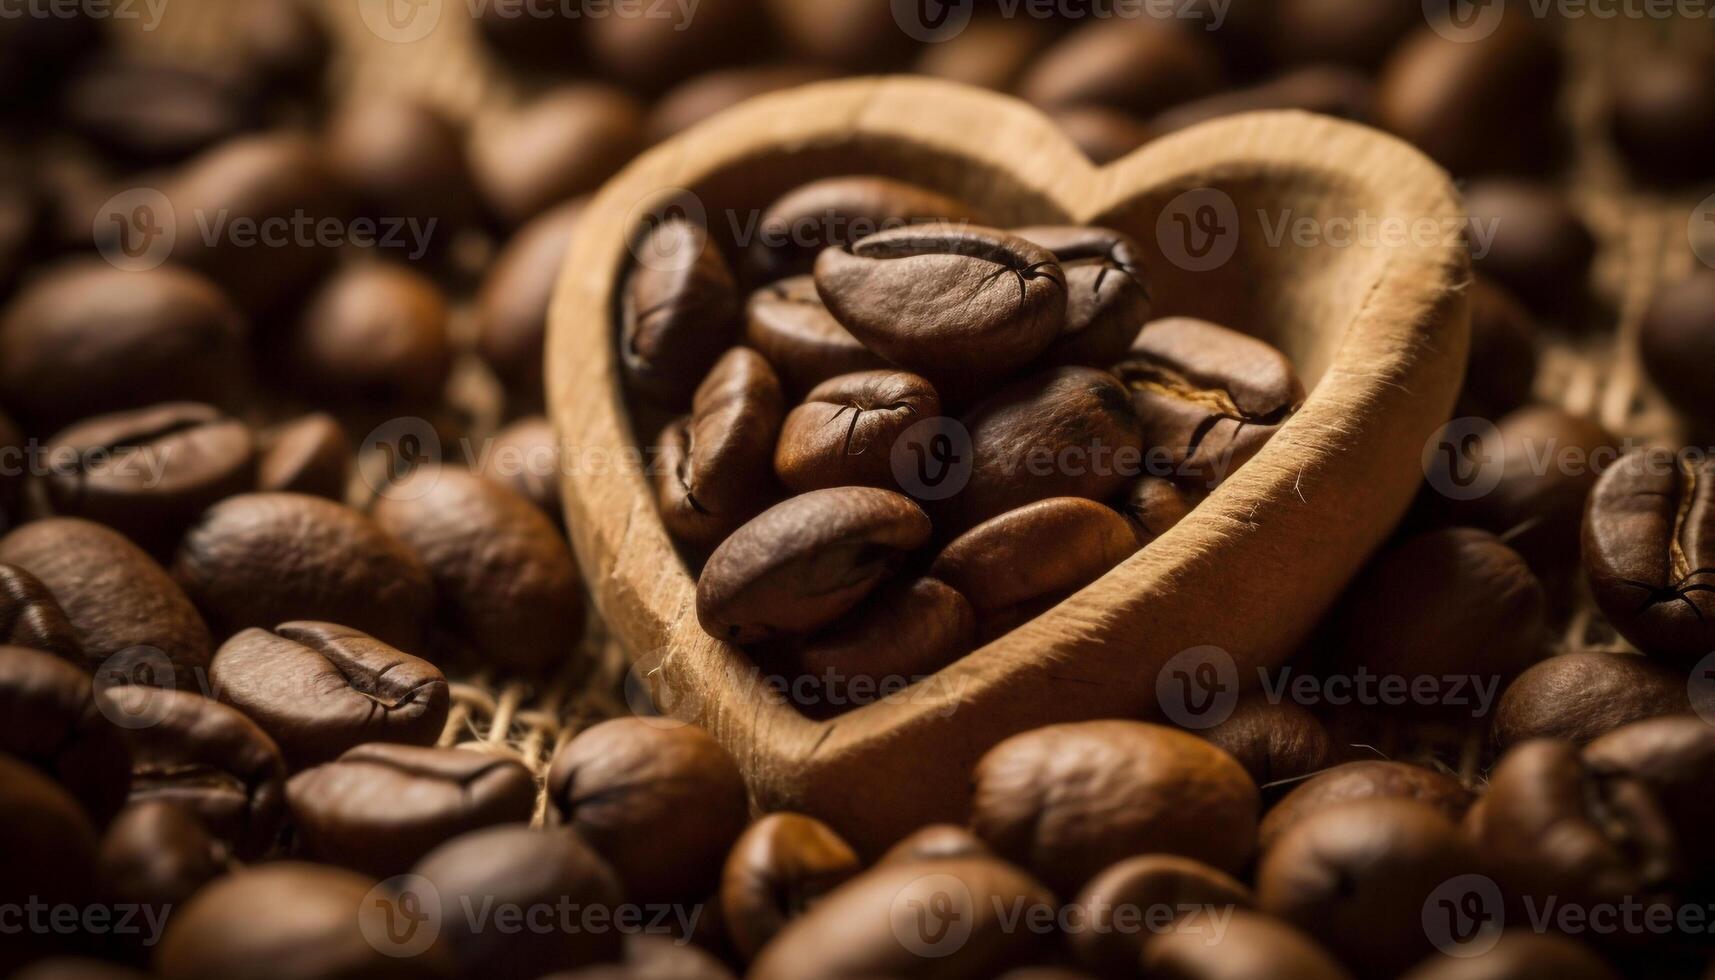 Freshly brewed coffee, rich in caffeine, a love for gourmet photo